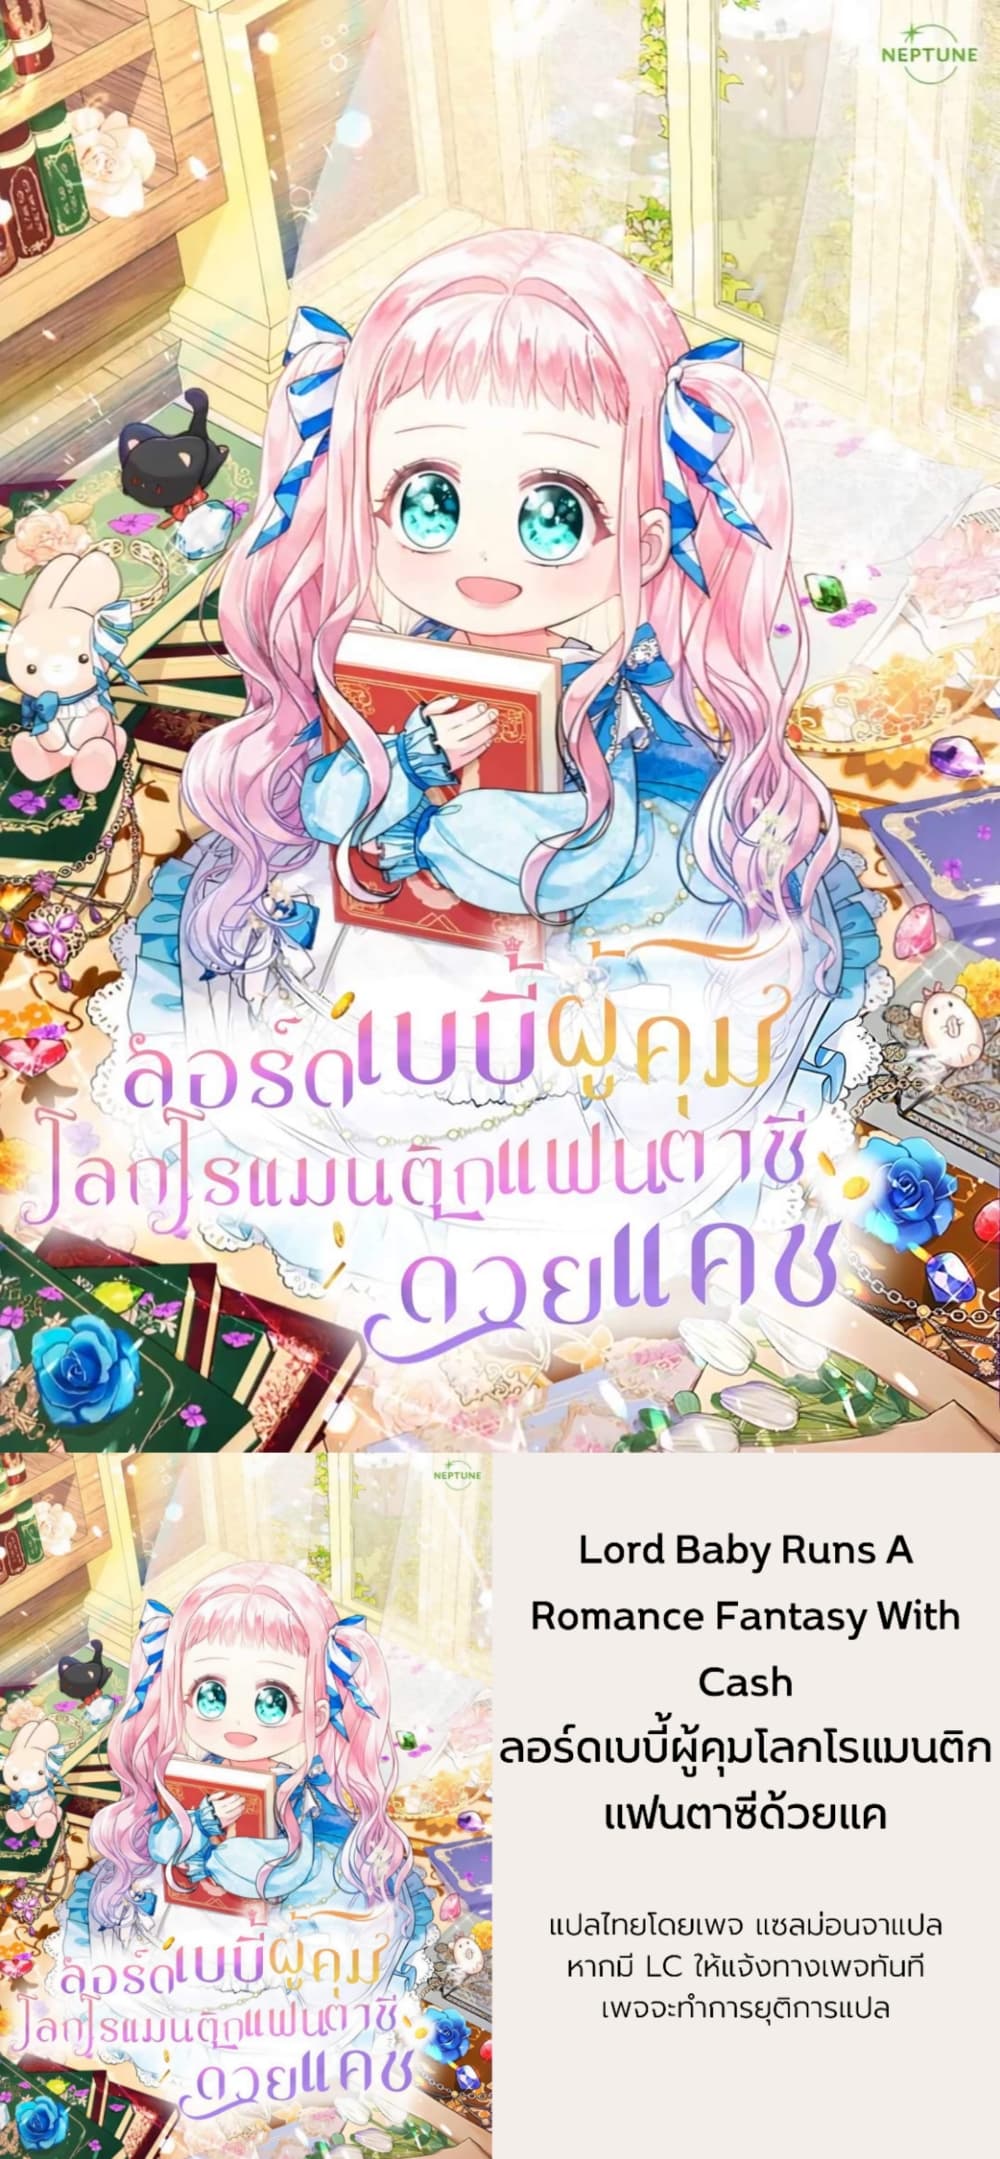 Lord Baby Runs a Romance Fantasy With Cash 8-8